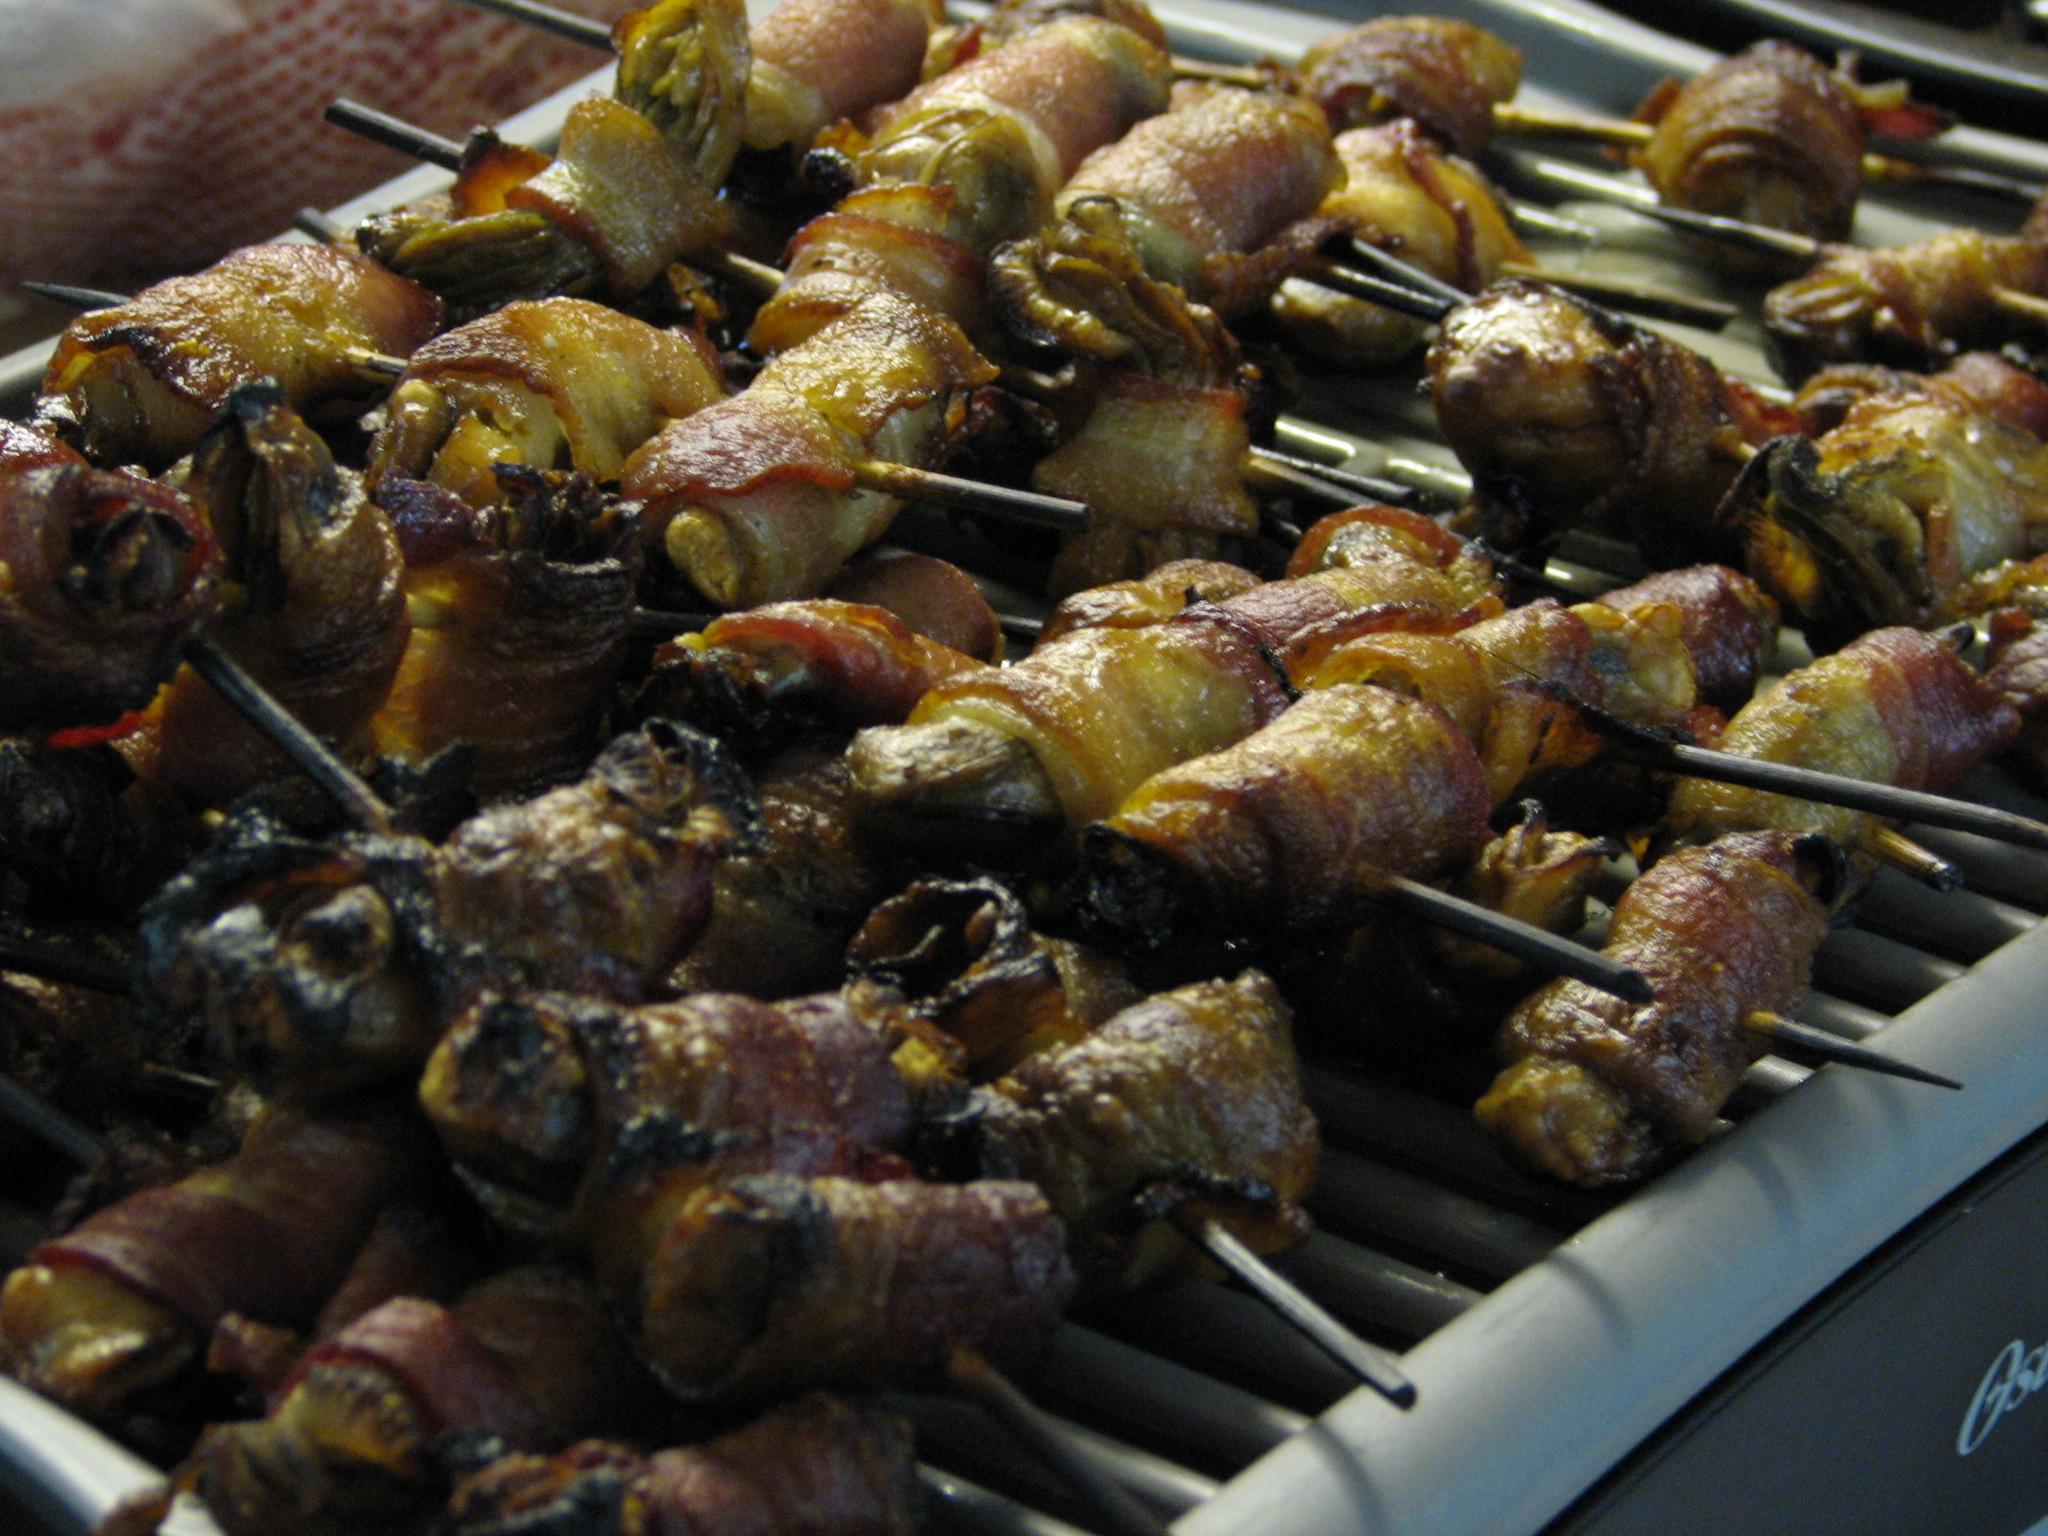 there is many skewers of food on a rack